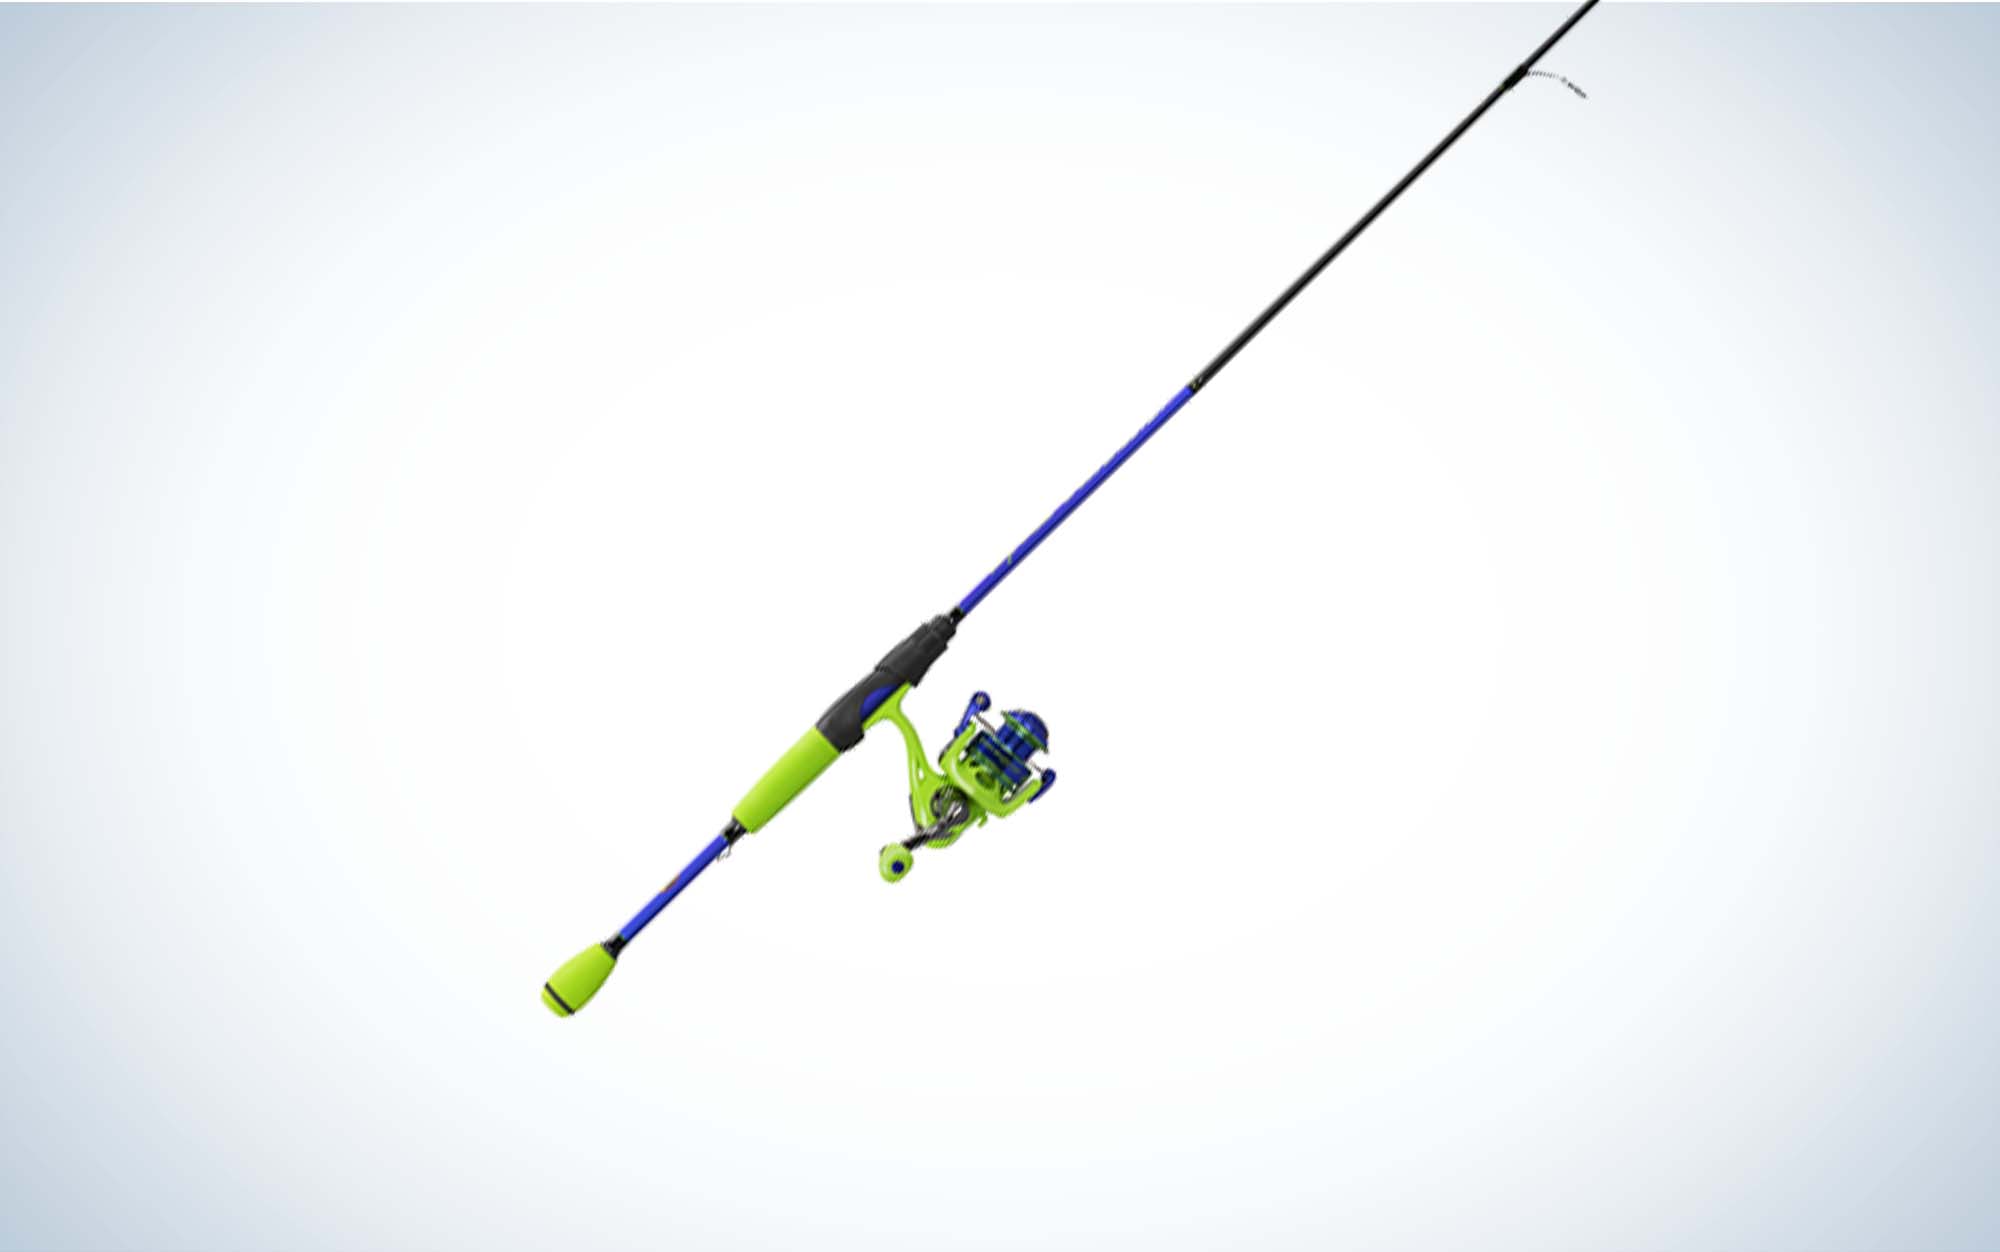  Lew's Crappie Thunder Spinning Rod, 4-Foot 6-Inch 2-Piece Fishing  Rod, Light Power, Fast Action, Premium 2-Piece Graphite Blank, EVA Split  Grip Handle, Crappie Thunder Green : Sports & Outdoors